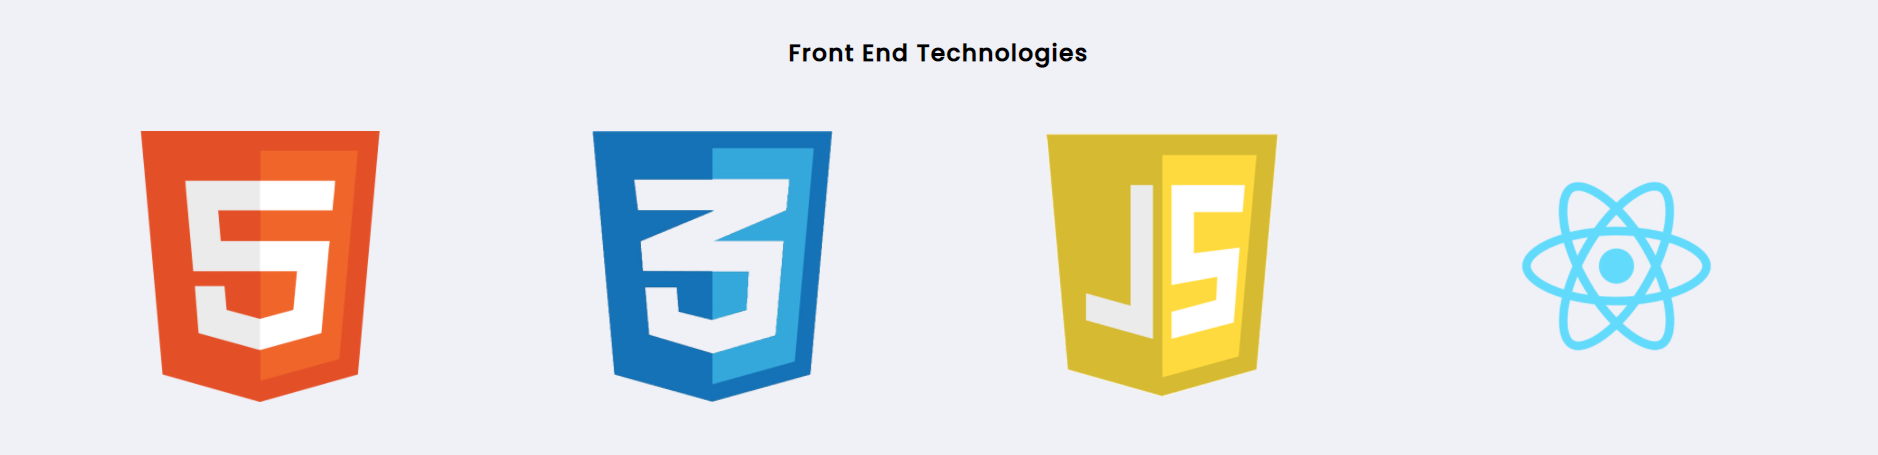 frontend_technologies.png